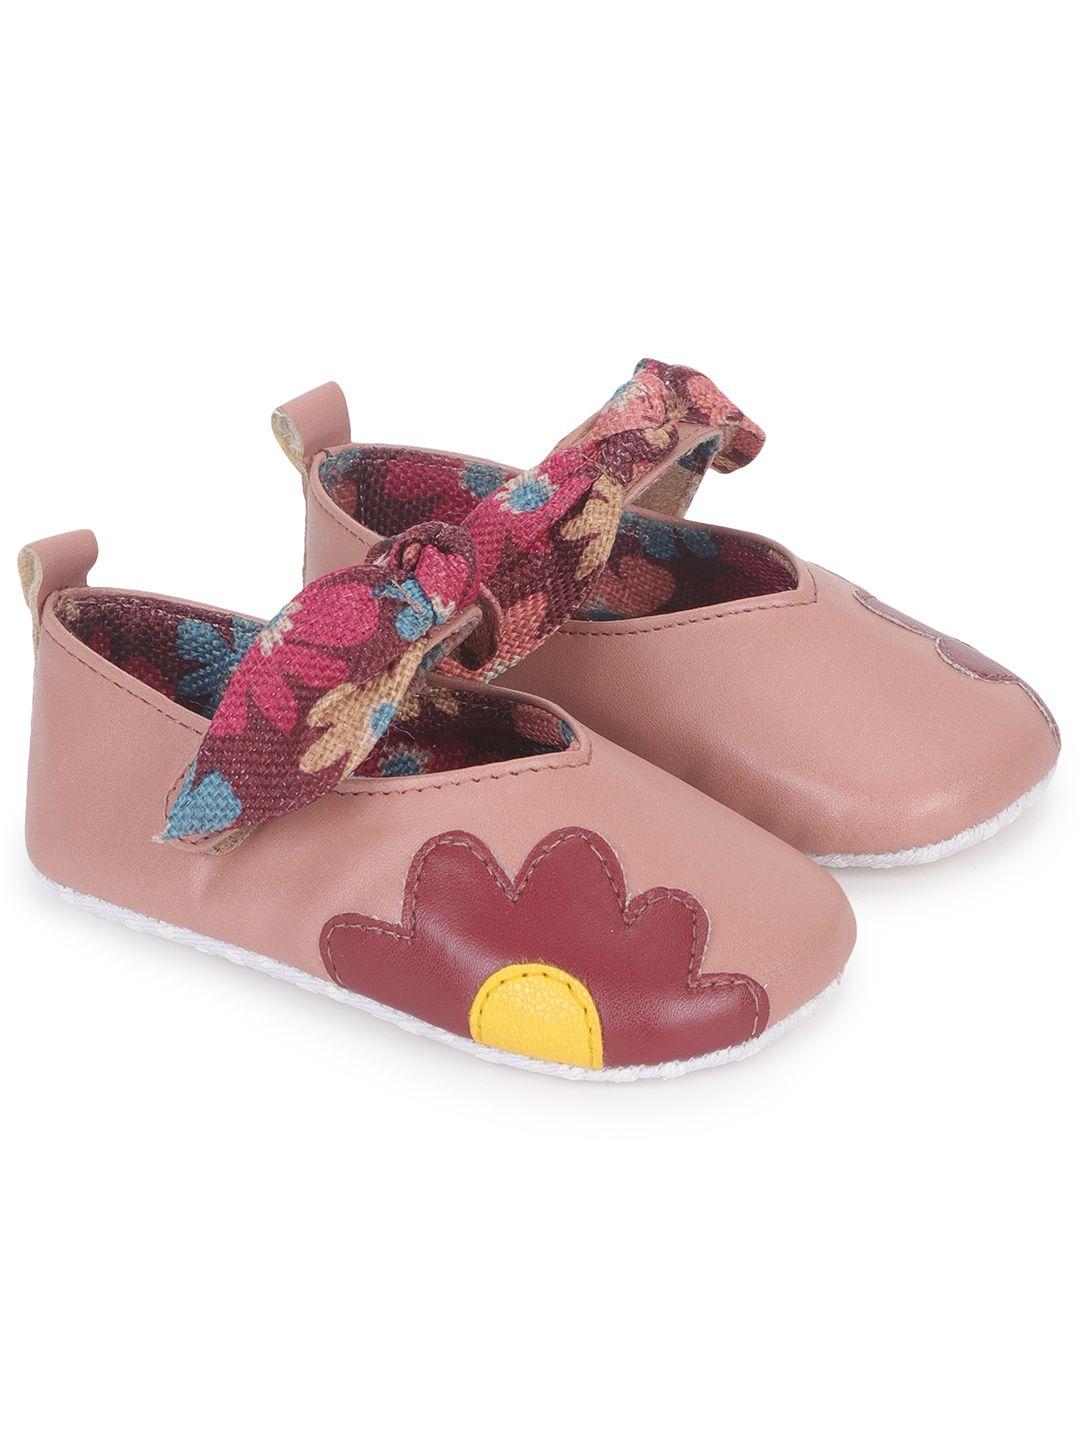 mothercare infant girls floral applique pram booties with bow detail